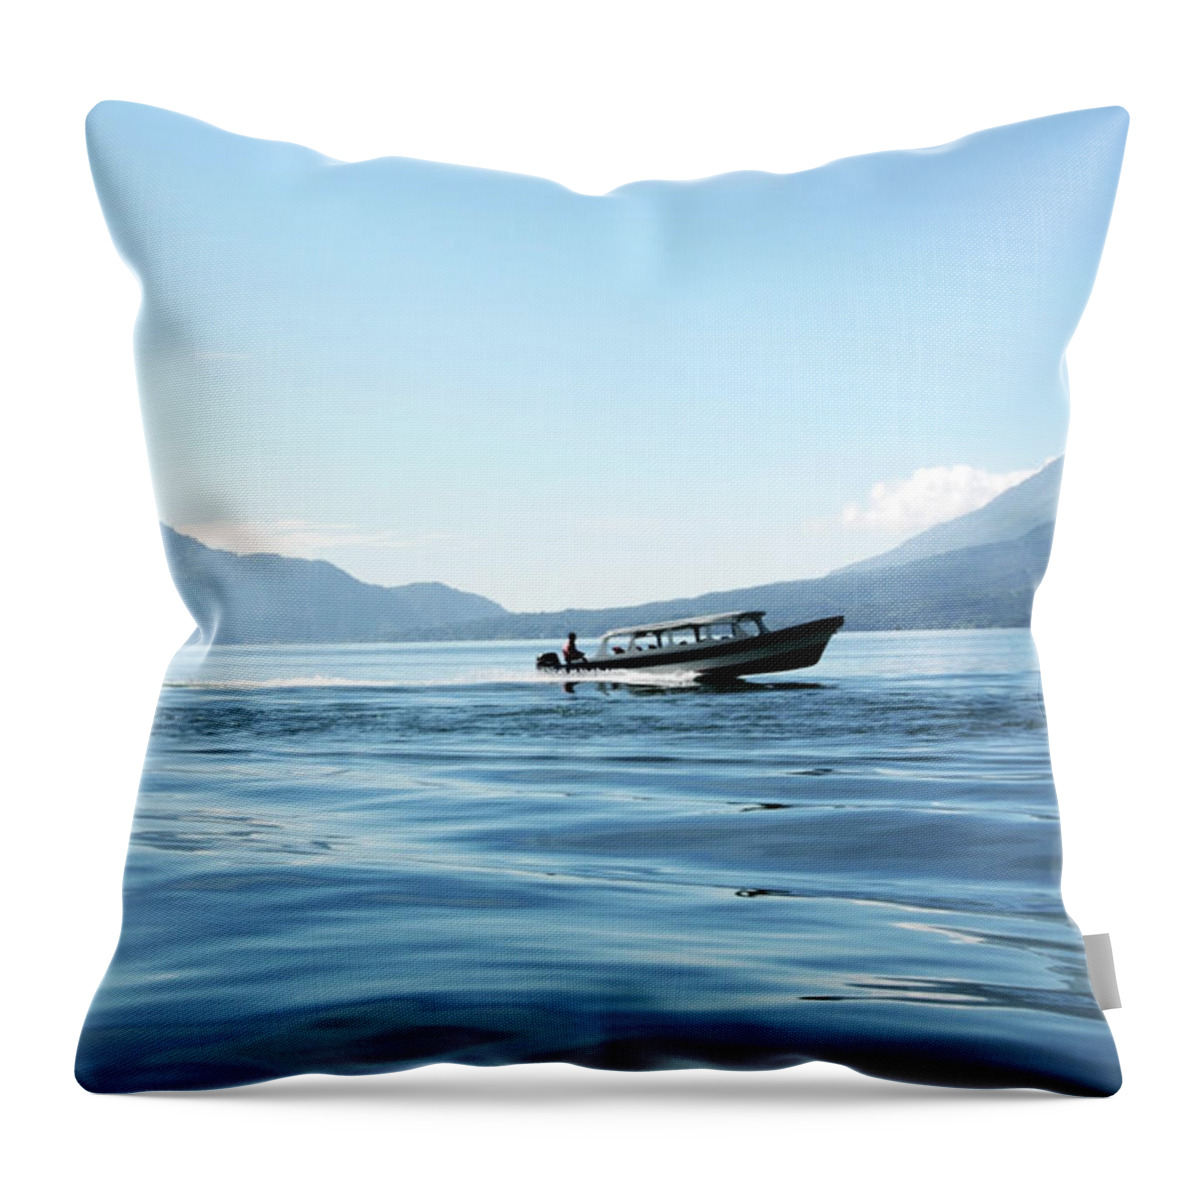 Scenics Throw Pillow featuring the photograph Boat At Full Speed On Lake Atitlan In by Lubilub